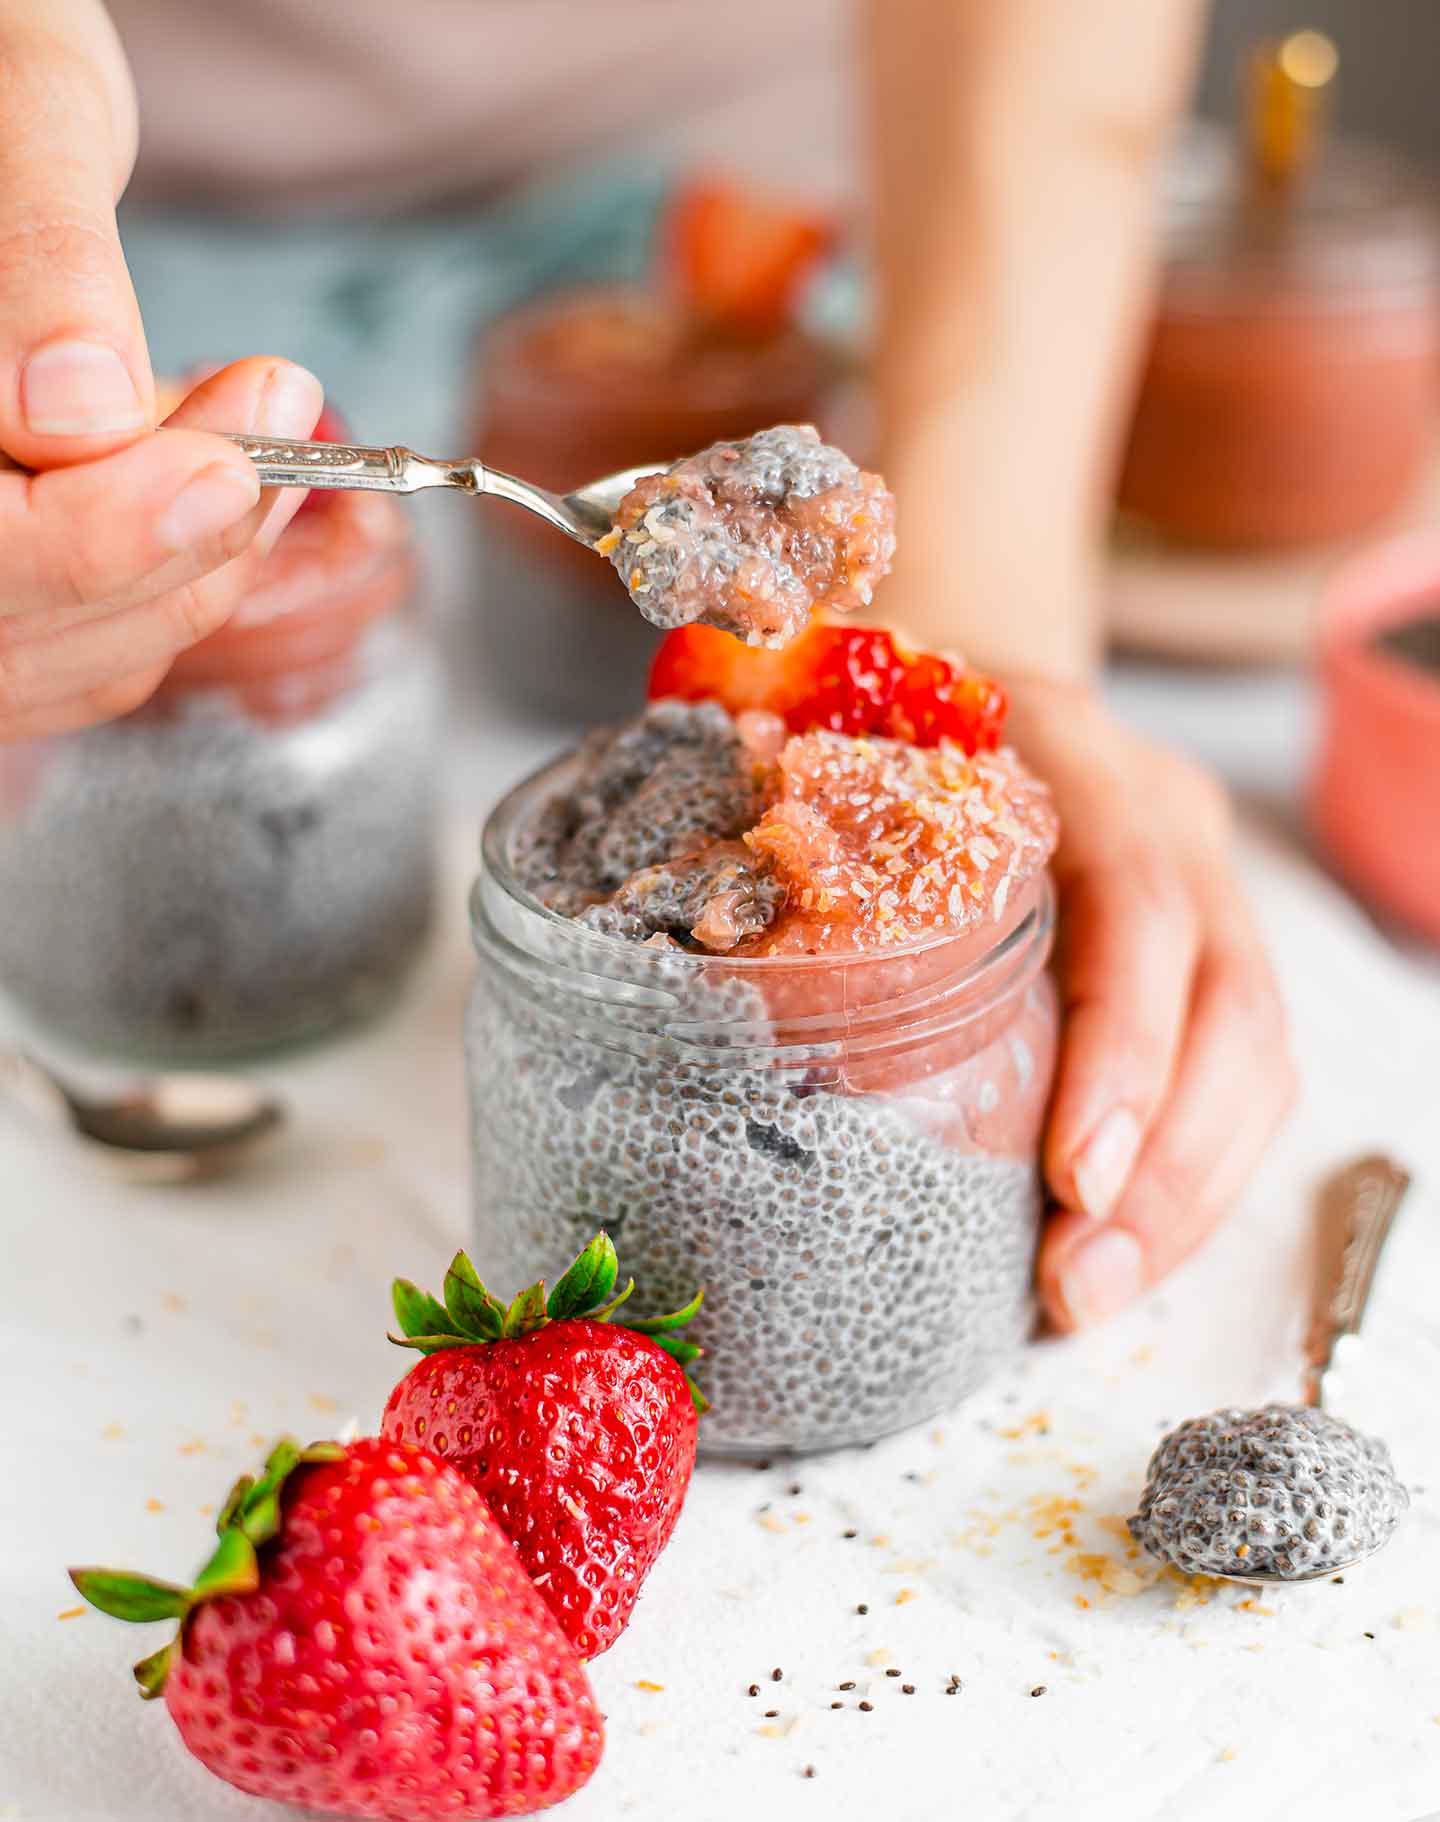 Side view of a hand scooping thick chia pudding from a jar. The pudding is topped with pink jam, fresh strawberries, and toasted coconut flakes.